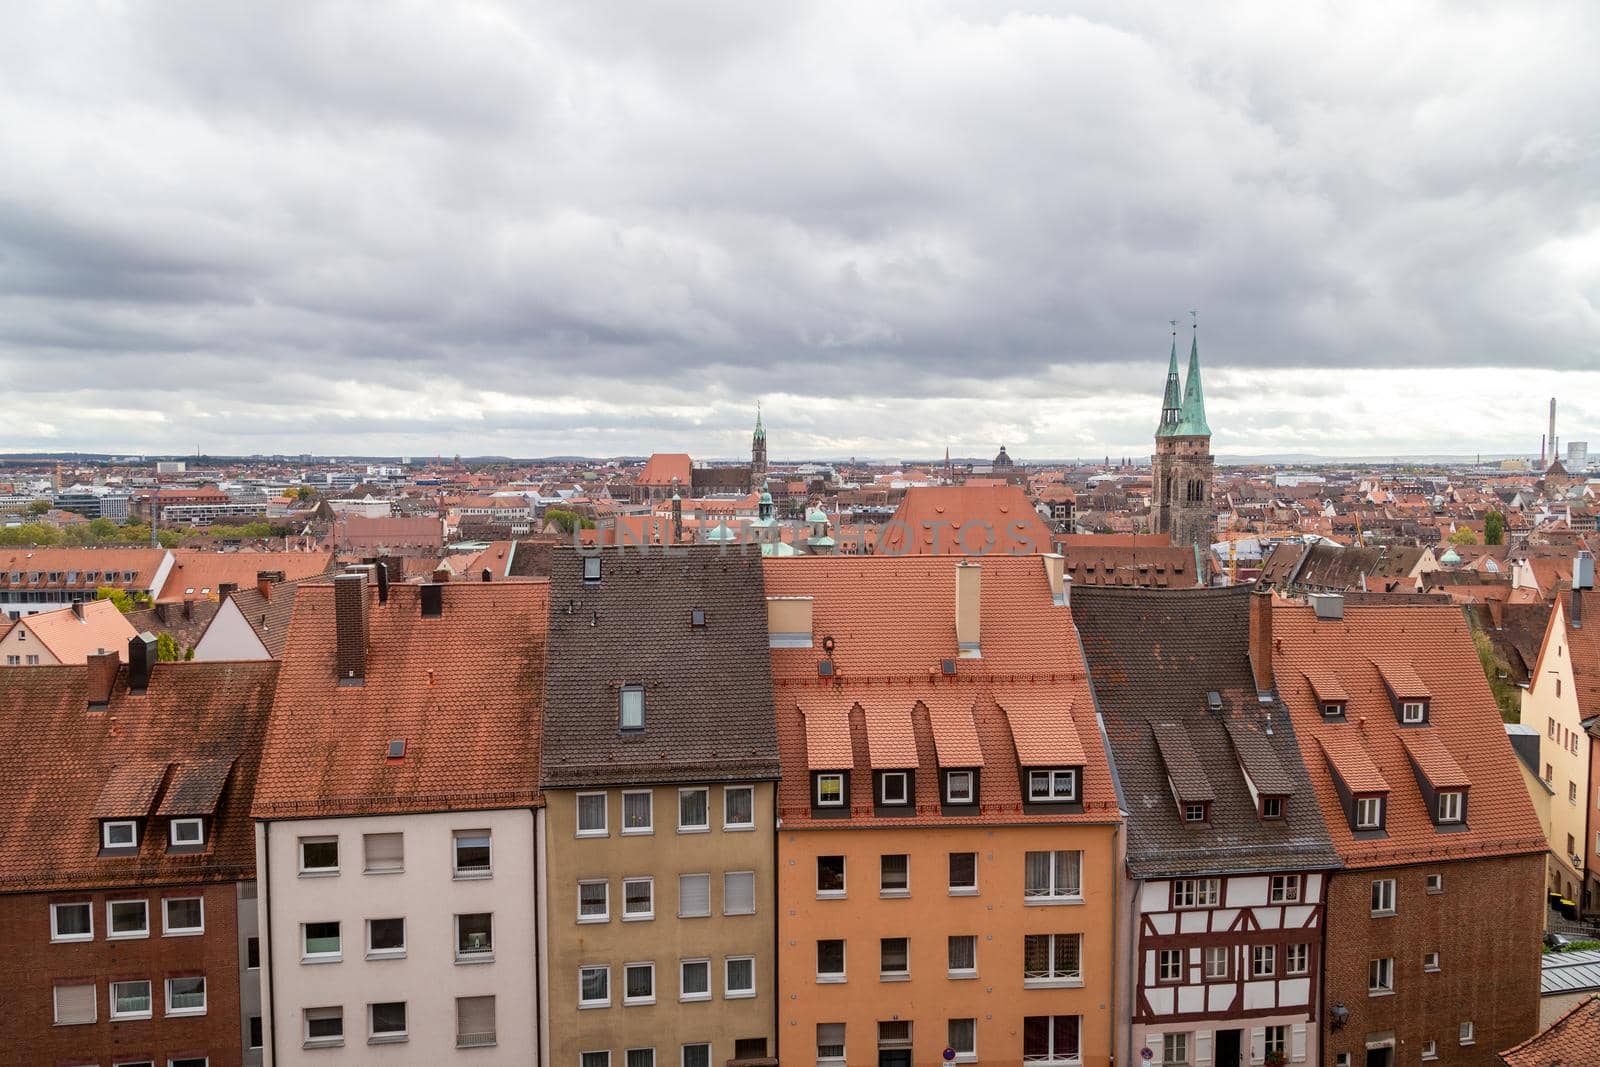 View from Nuremberg castle at the old city of Nuremberg, Bavaria, Germany in autunm